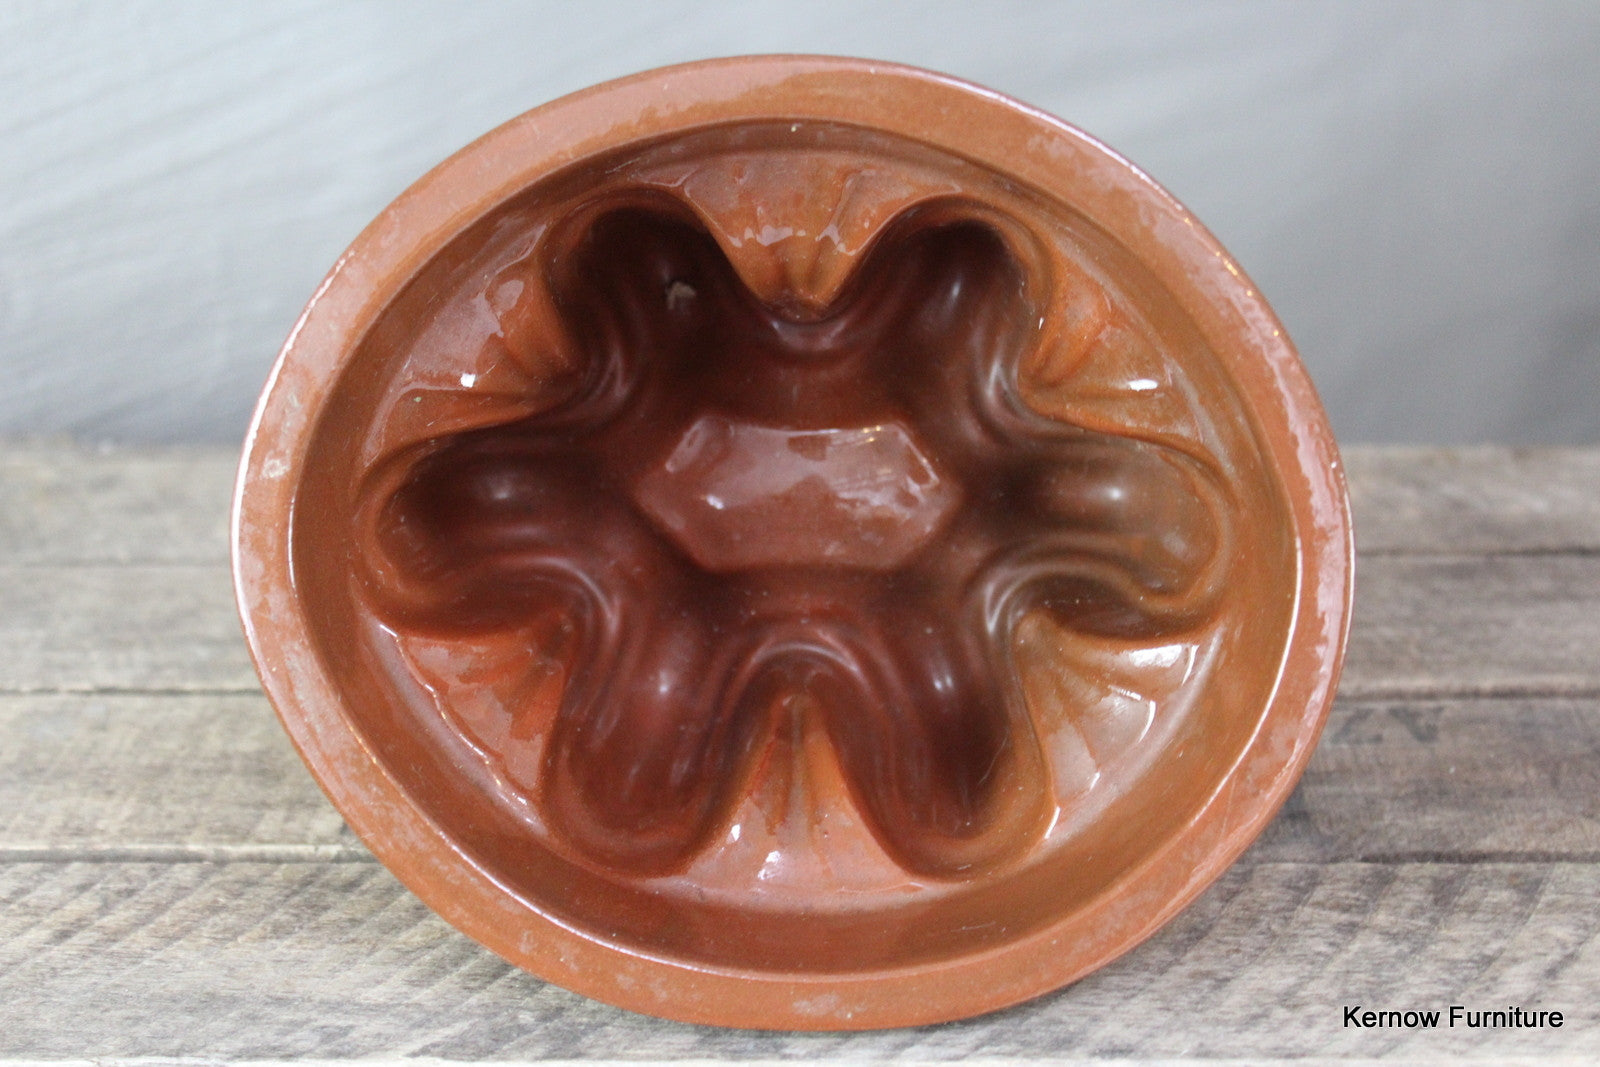 Victorian Pottery Jelly Mould - Kernow Furniture